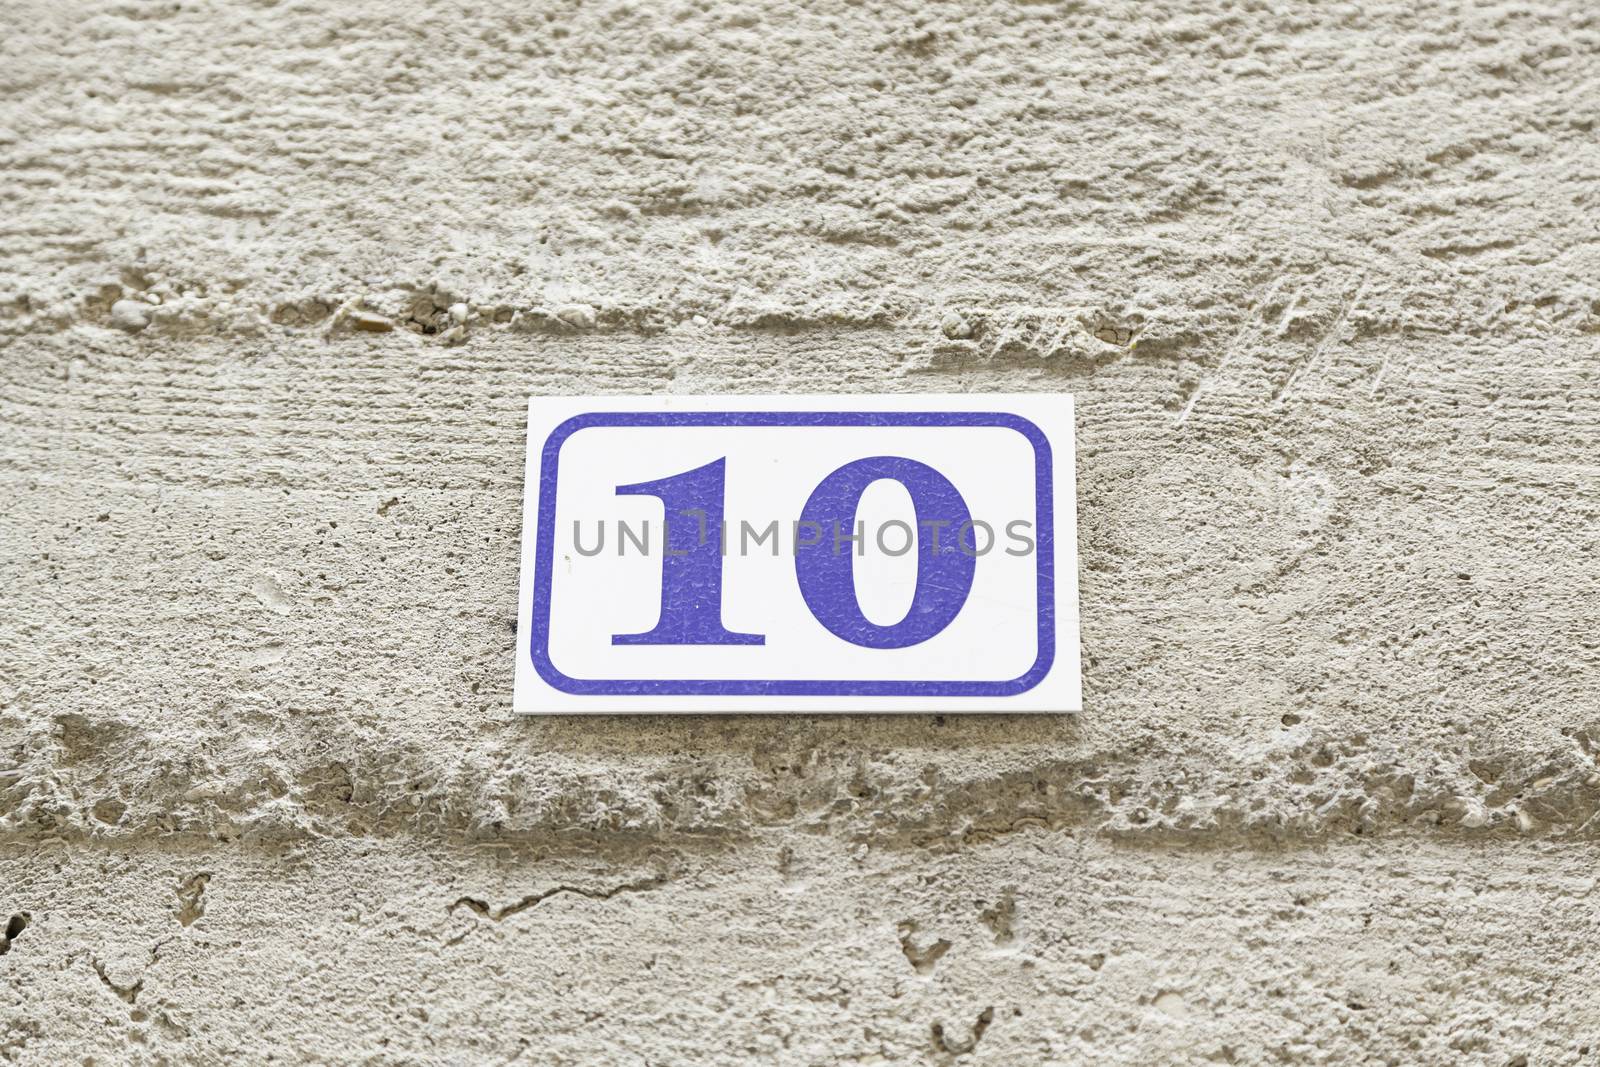 Number ten on a wall, detail of a number of information on a wall of a house, even number